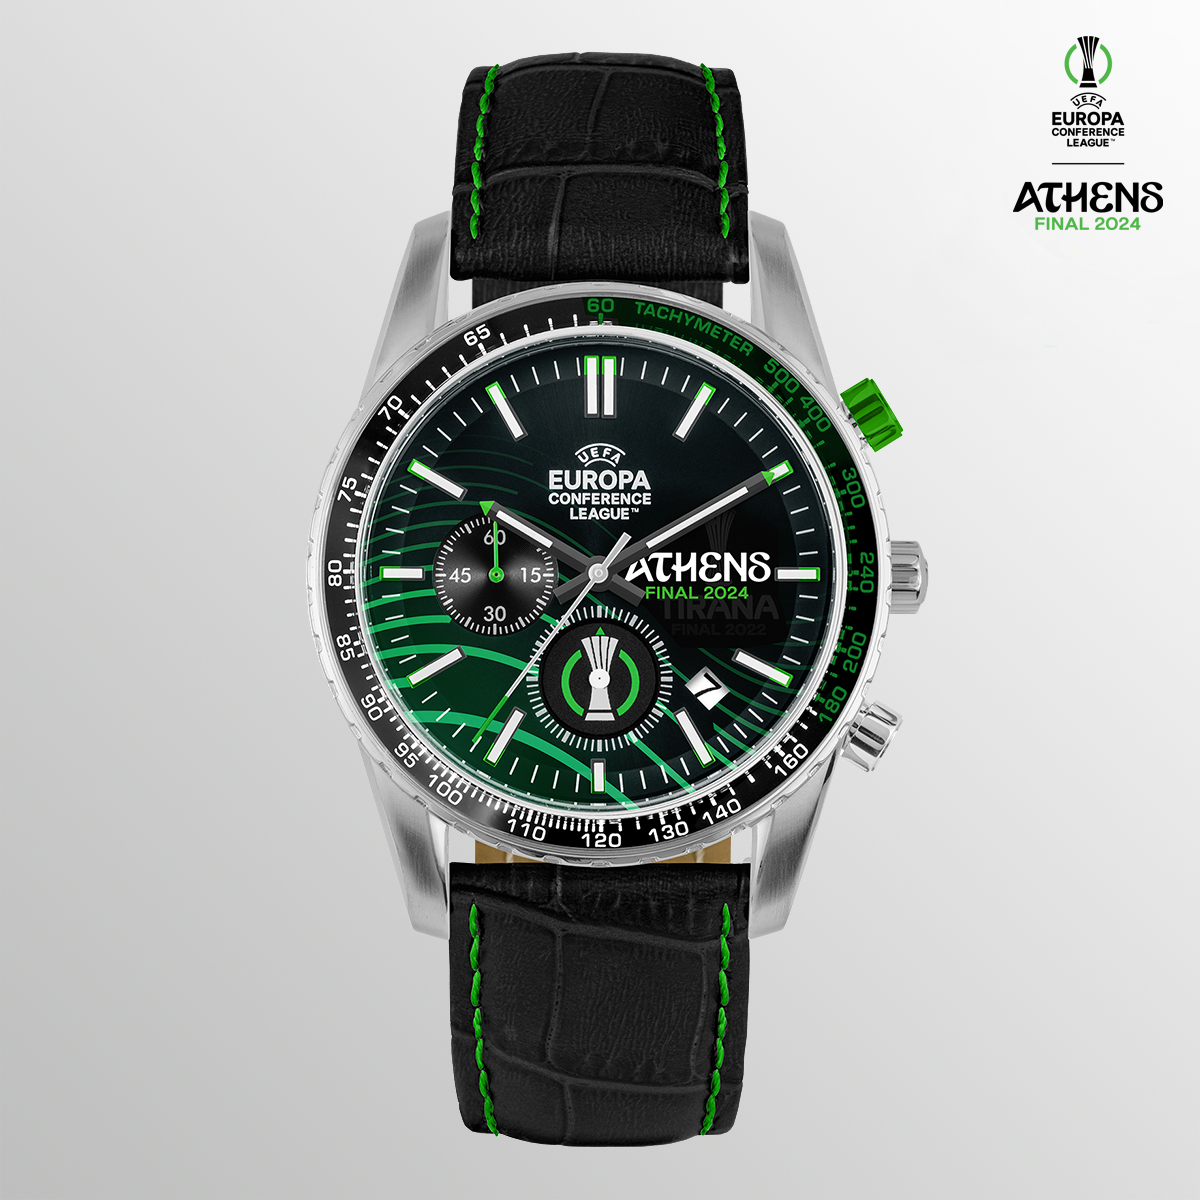 UECL Athens Final 2024 Chronograph ECL-101E Watch